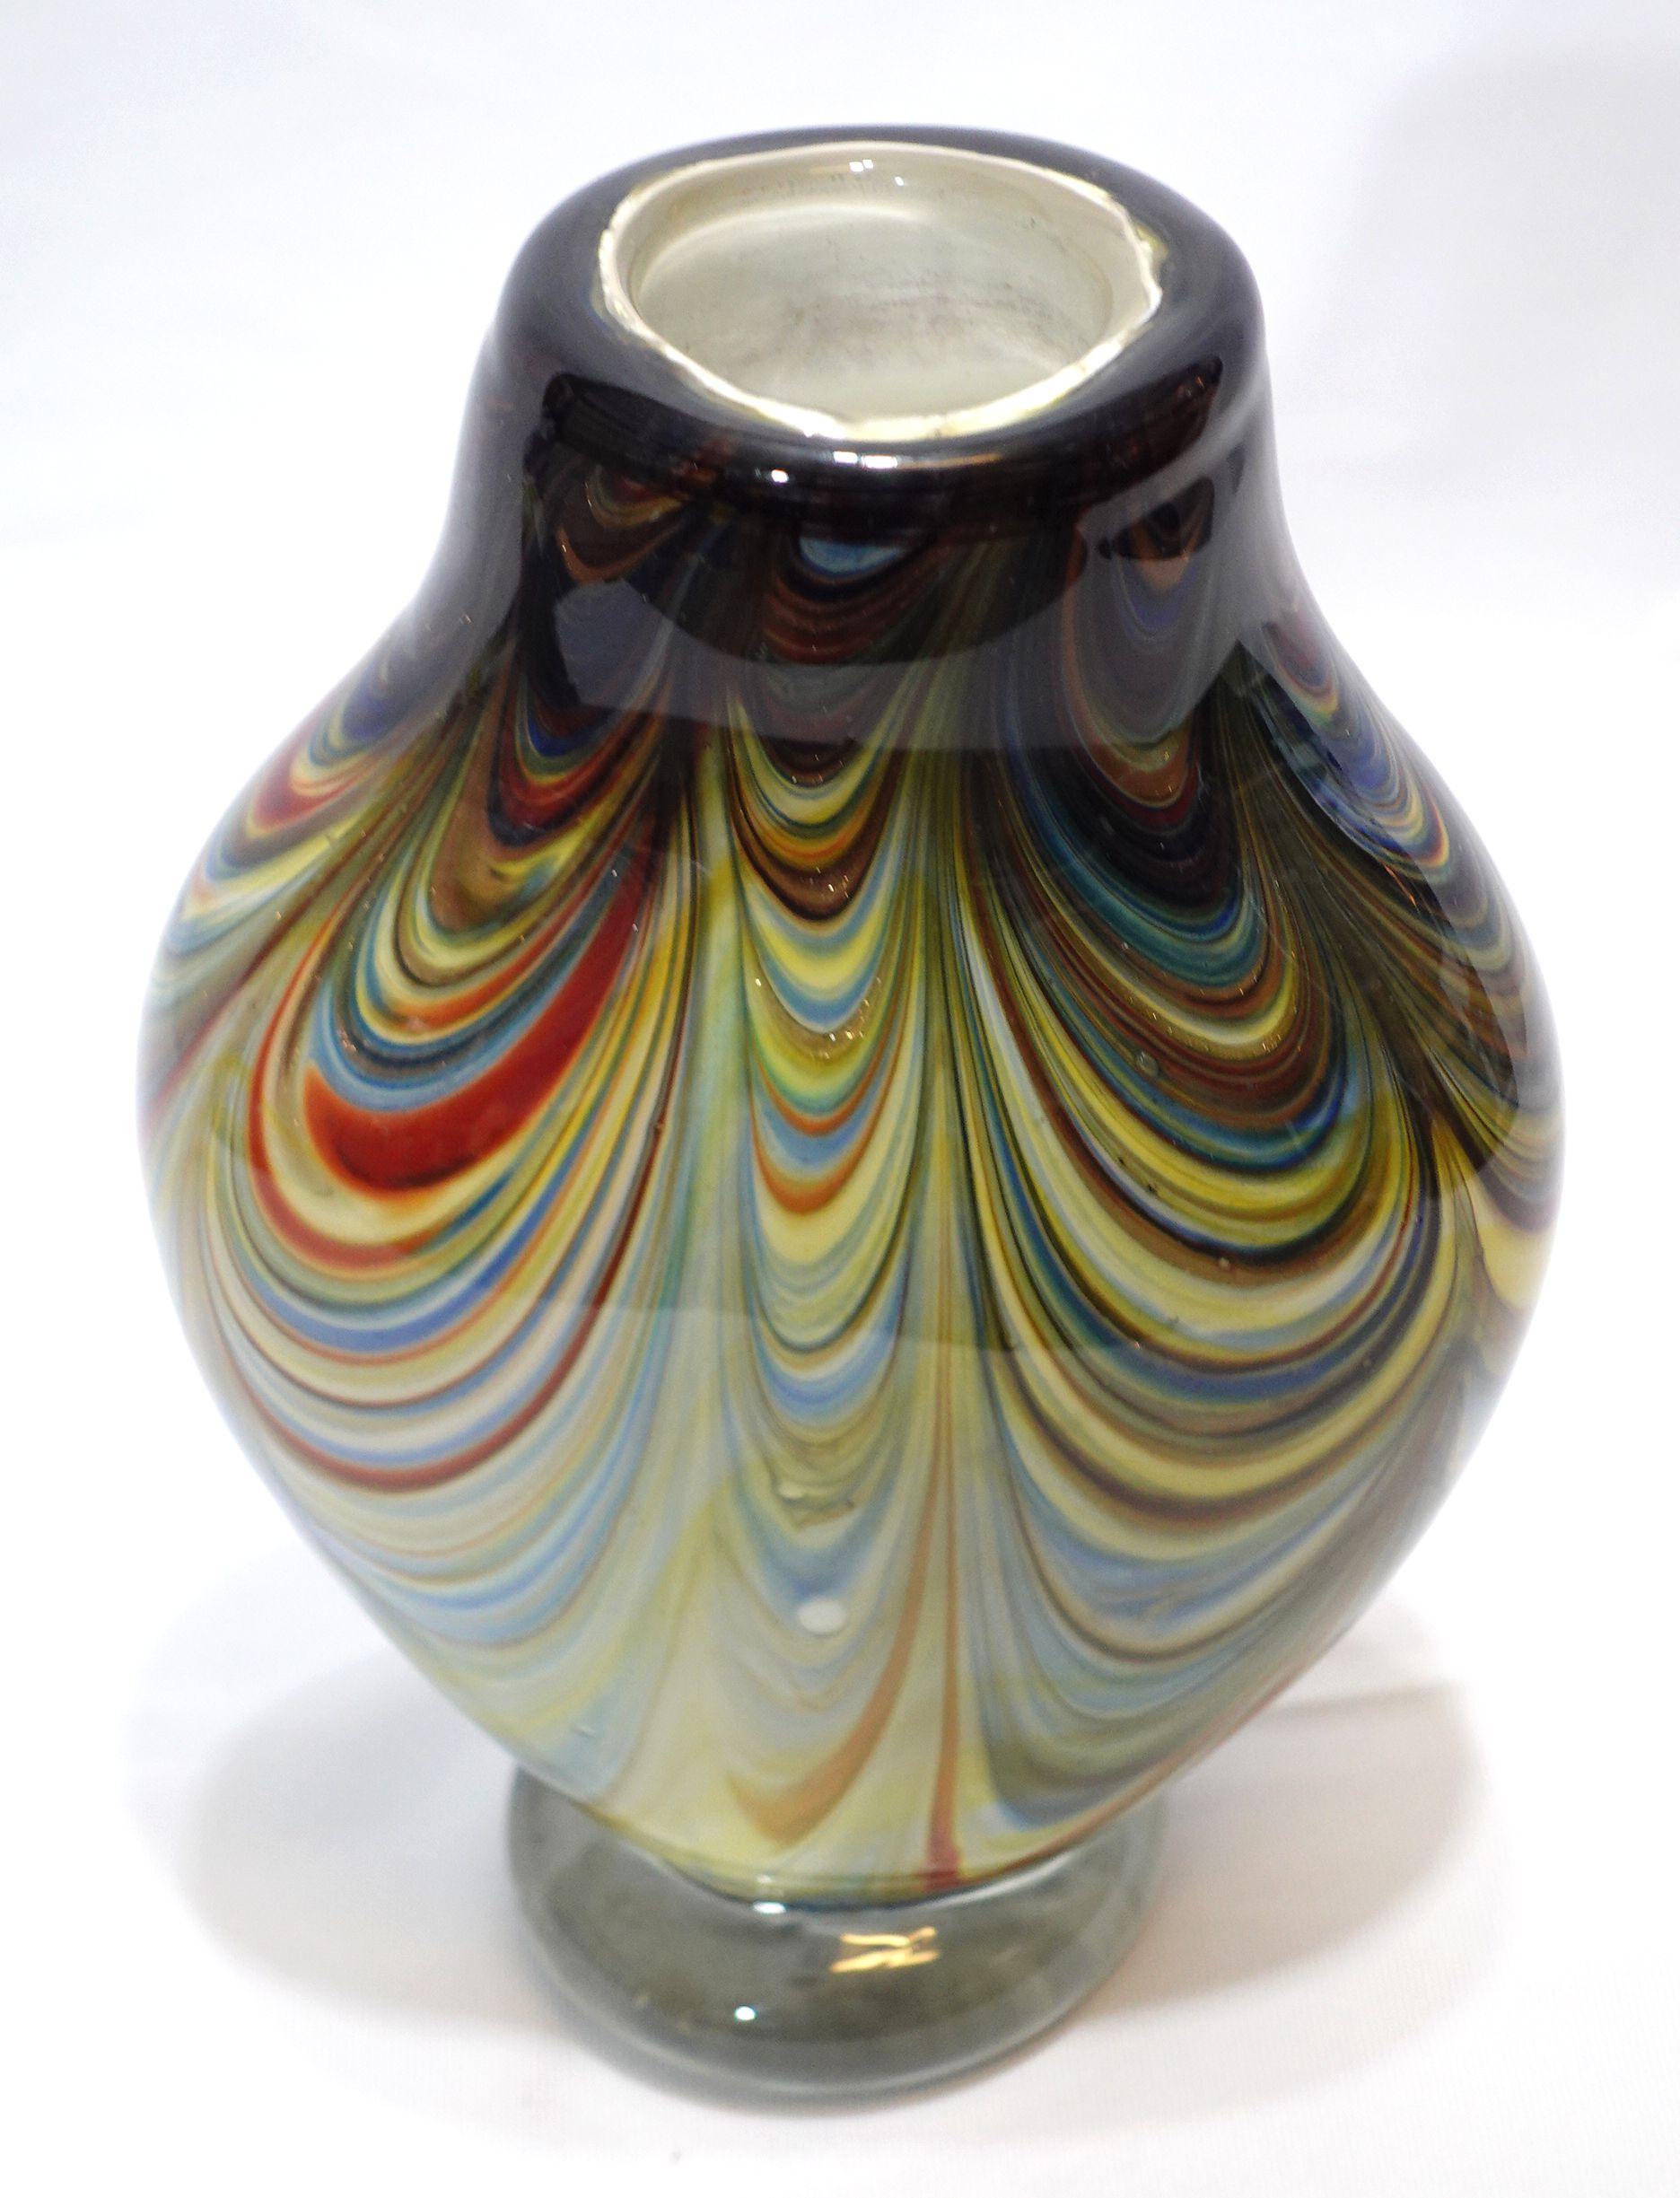 A Large and Heavy Murano Hand Blown  Glass Vase with colorful ripple patterns on the entire body.